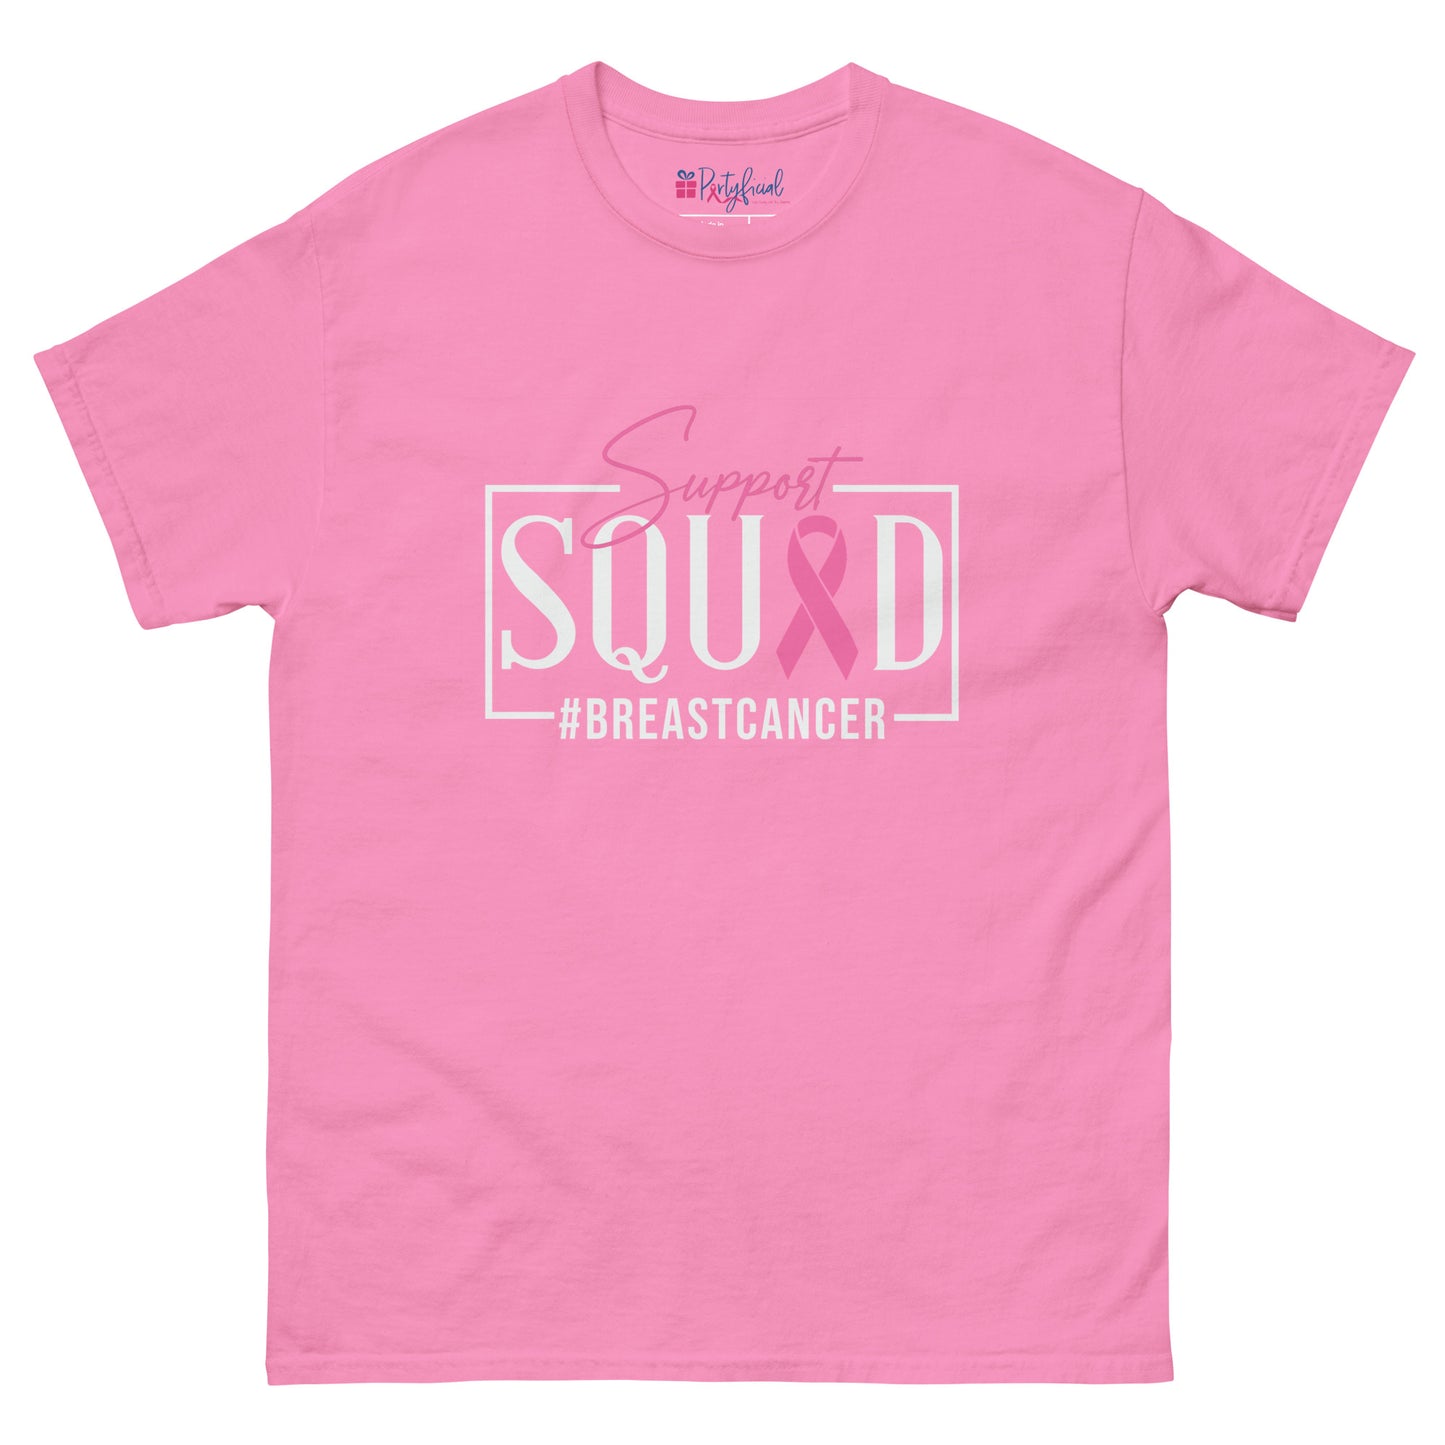 Breast Cancer Support Squad T-Shirt